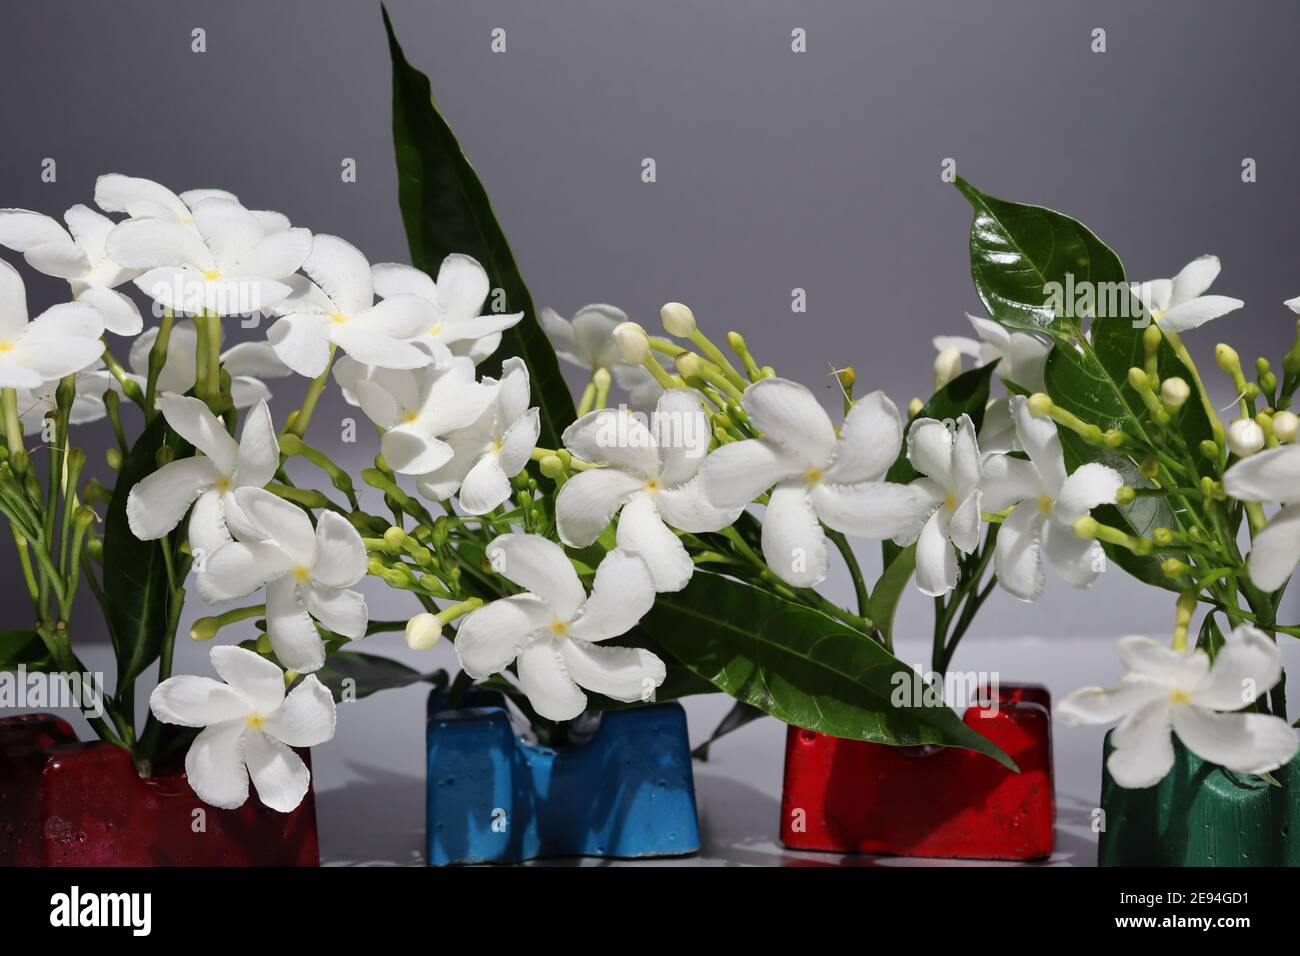 A collection of pure white flowers bloomed together. Stock Photo